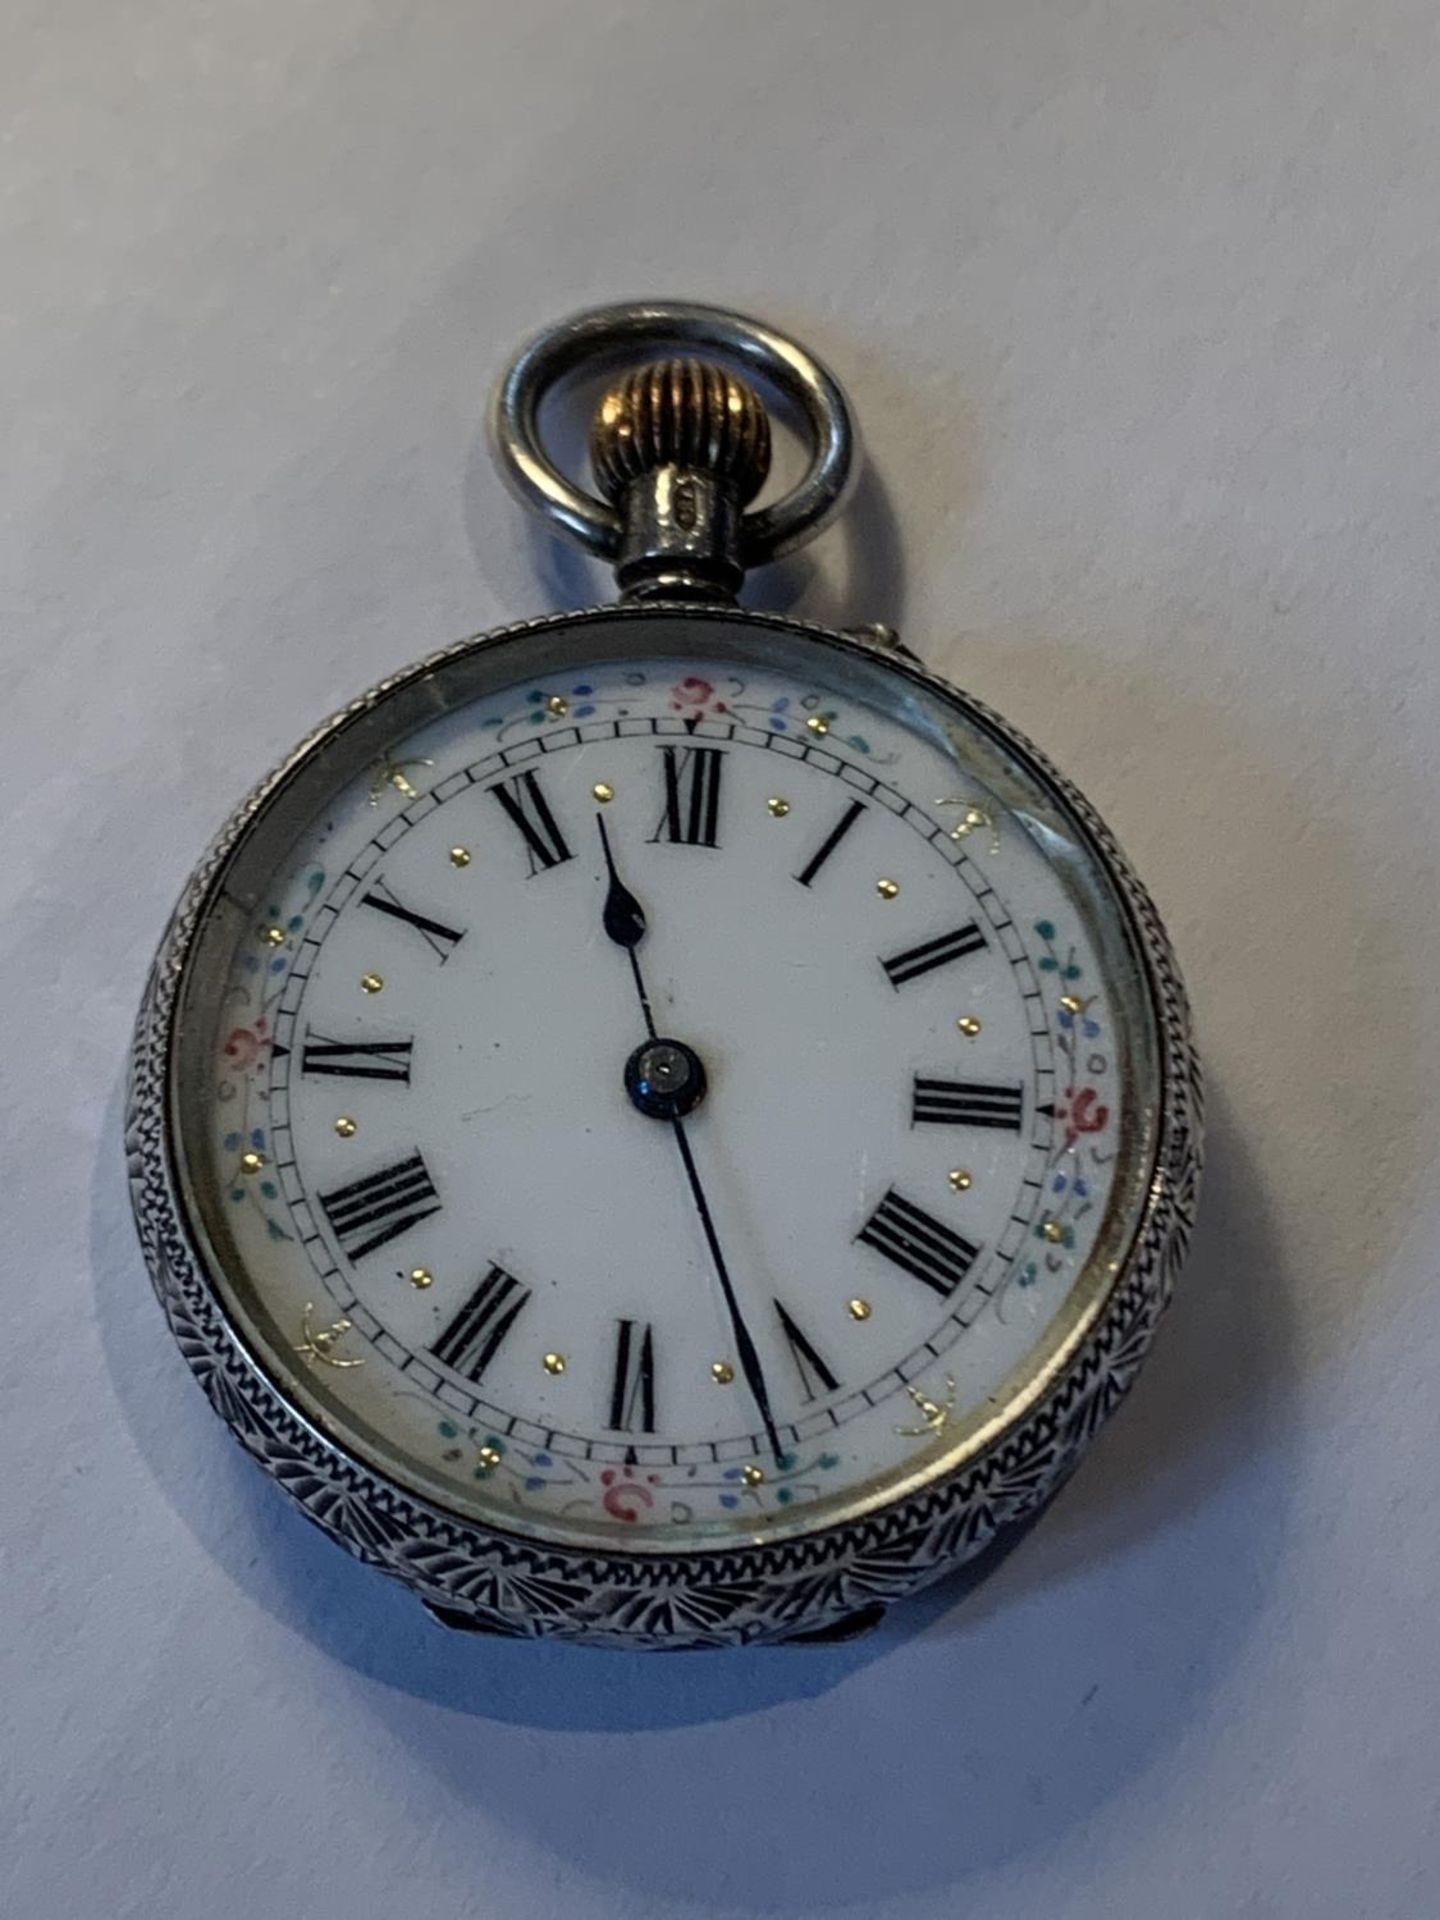 A MARKED 925 SILVER POCKET WATCH WITH A WHITE ENAMEL DECORATIVE FACE AND ROMAN NUMERALS